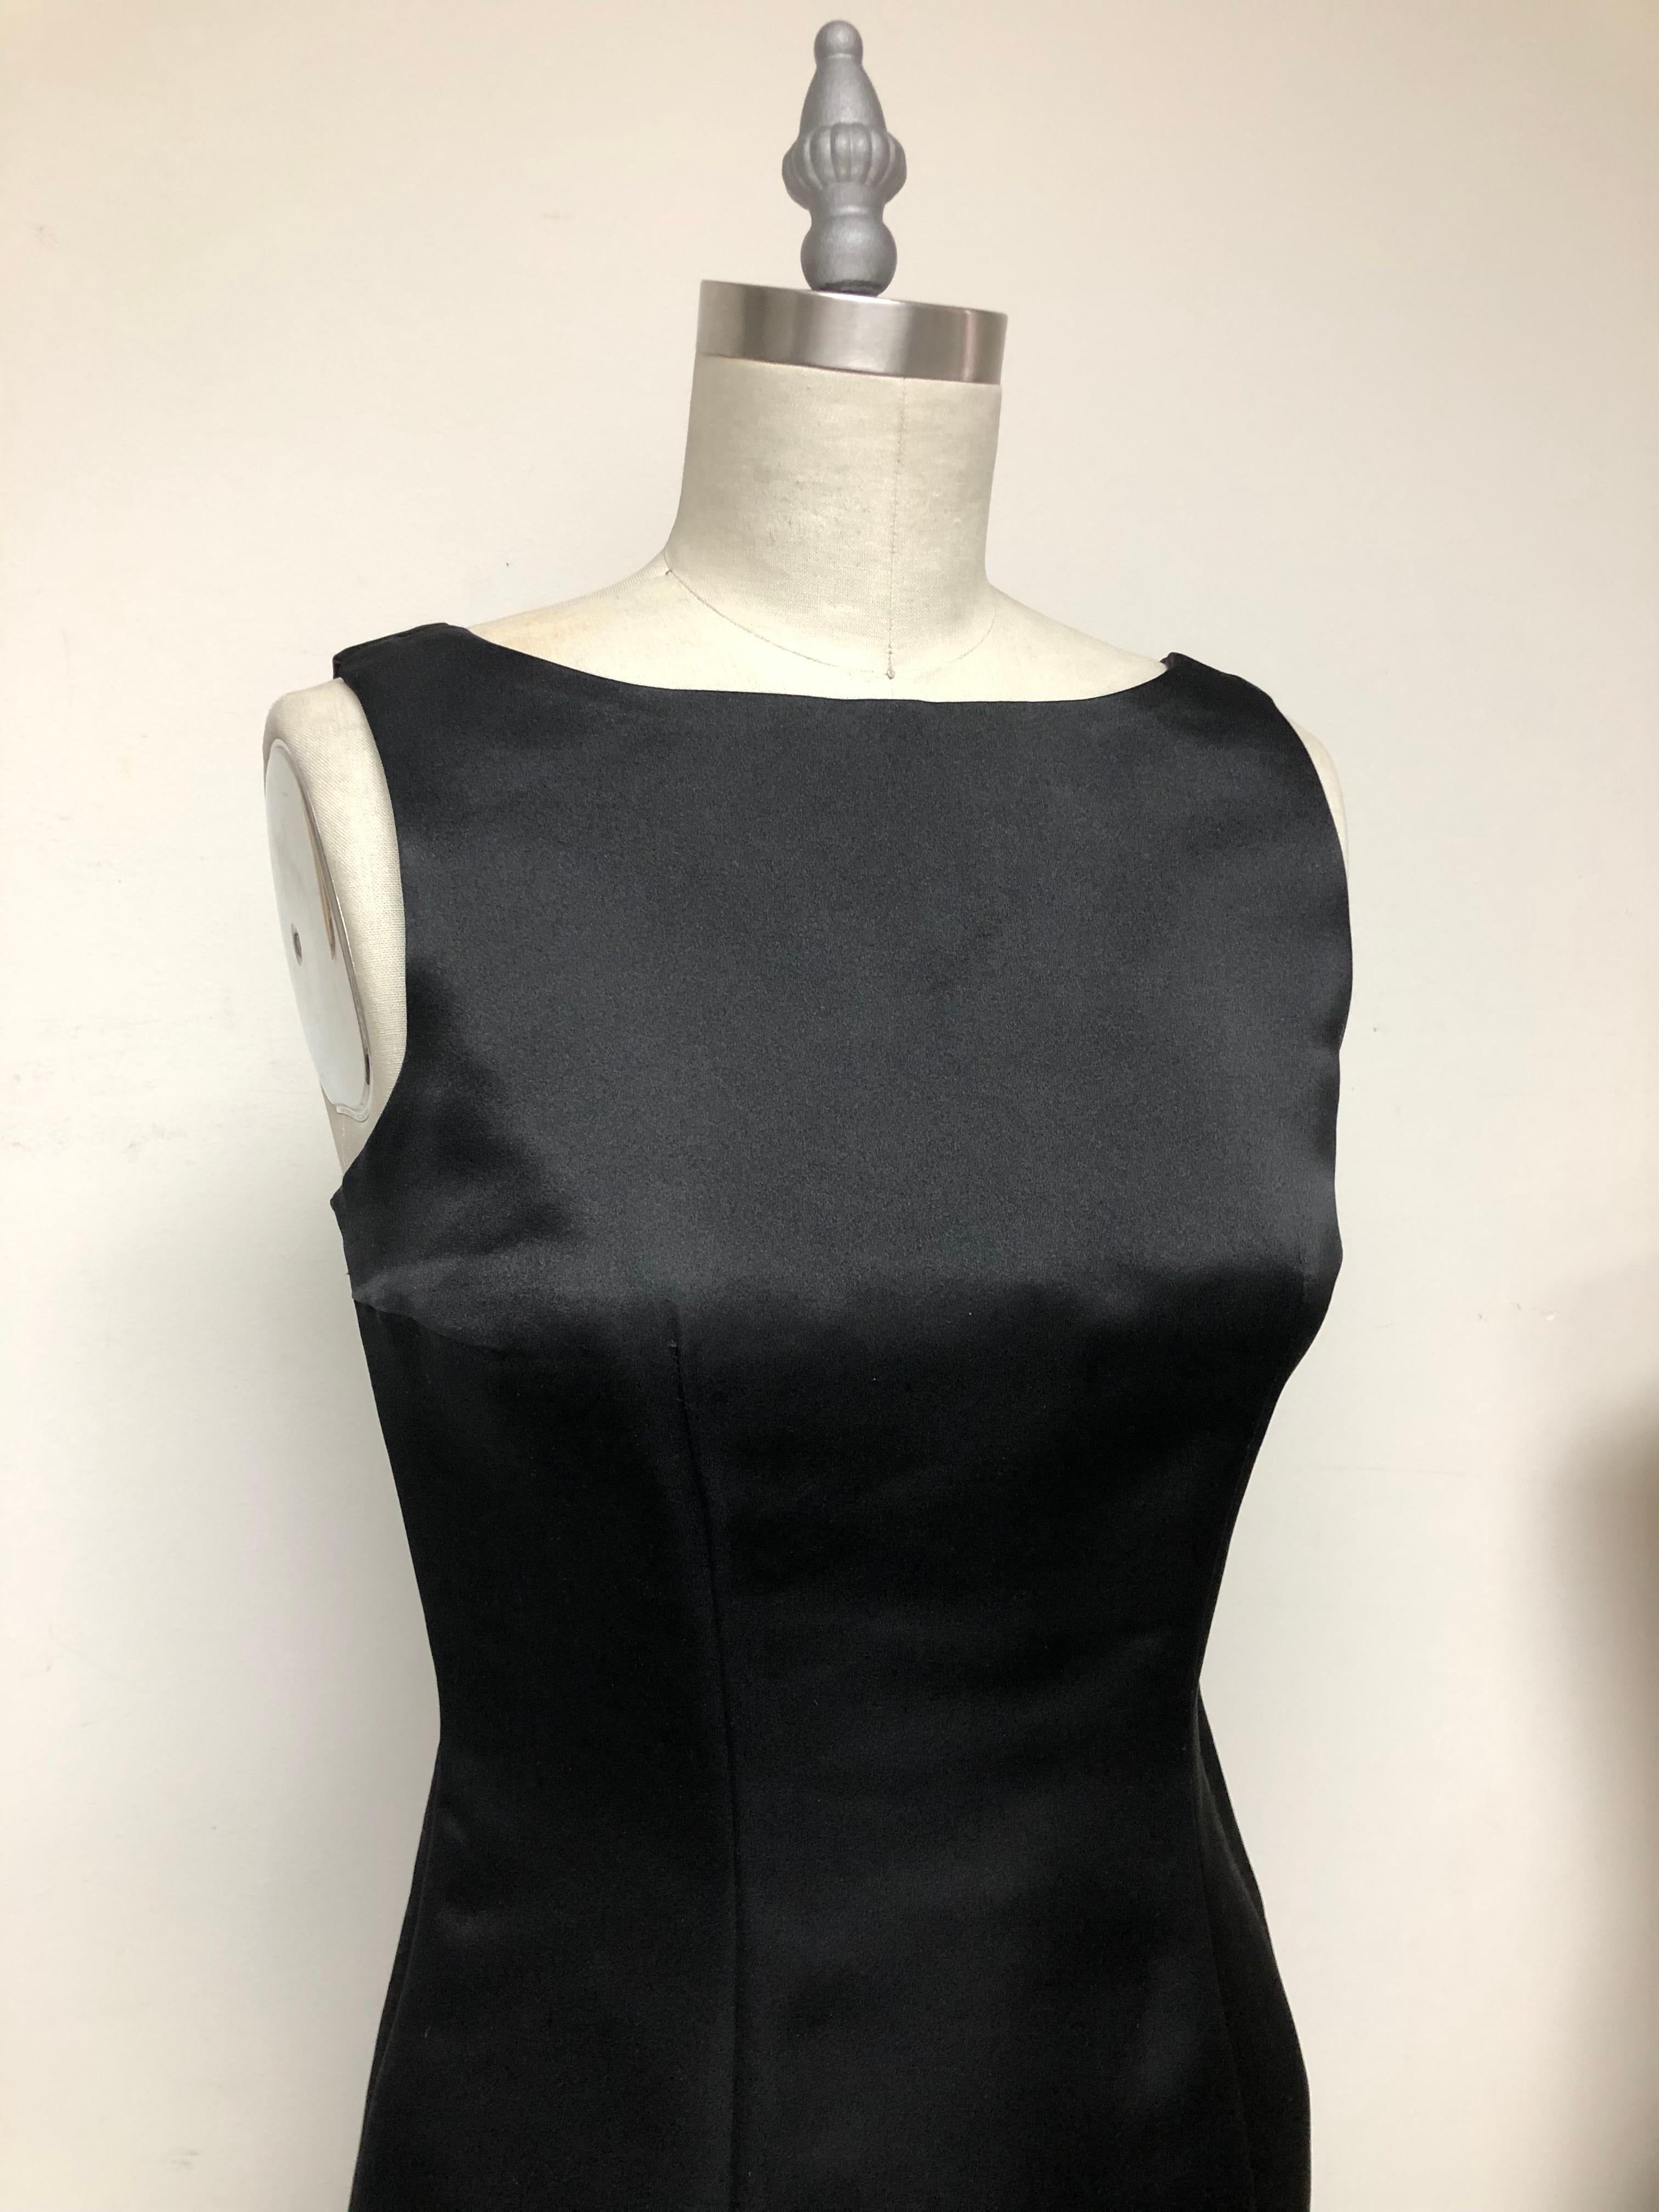 The perfect Little Black Dress in the Finest Italian Satin. Bateau Neckline with Back Straps and slit. The chicest and most wearable year round. Add your bijou, Manolo's and Long Gloves ....Audrey would approve. This dress is timeless and never
ends